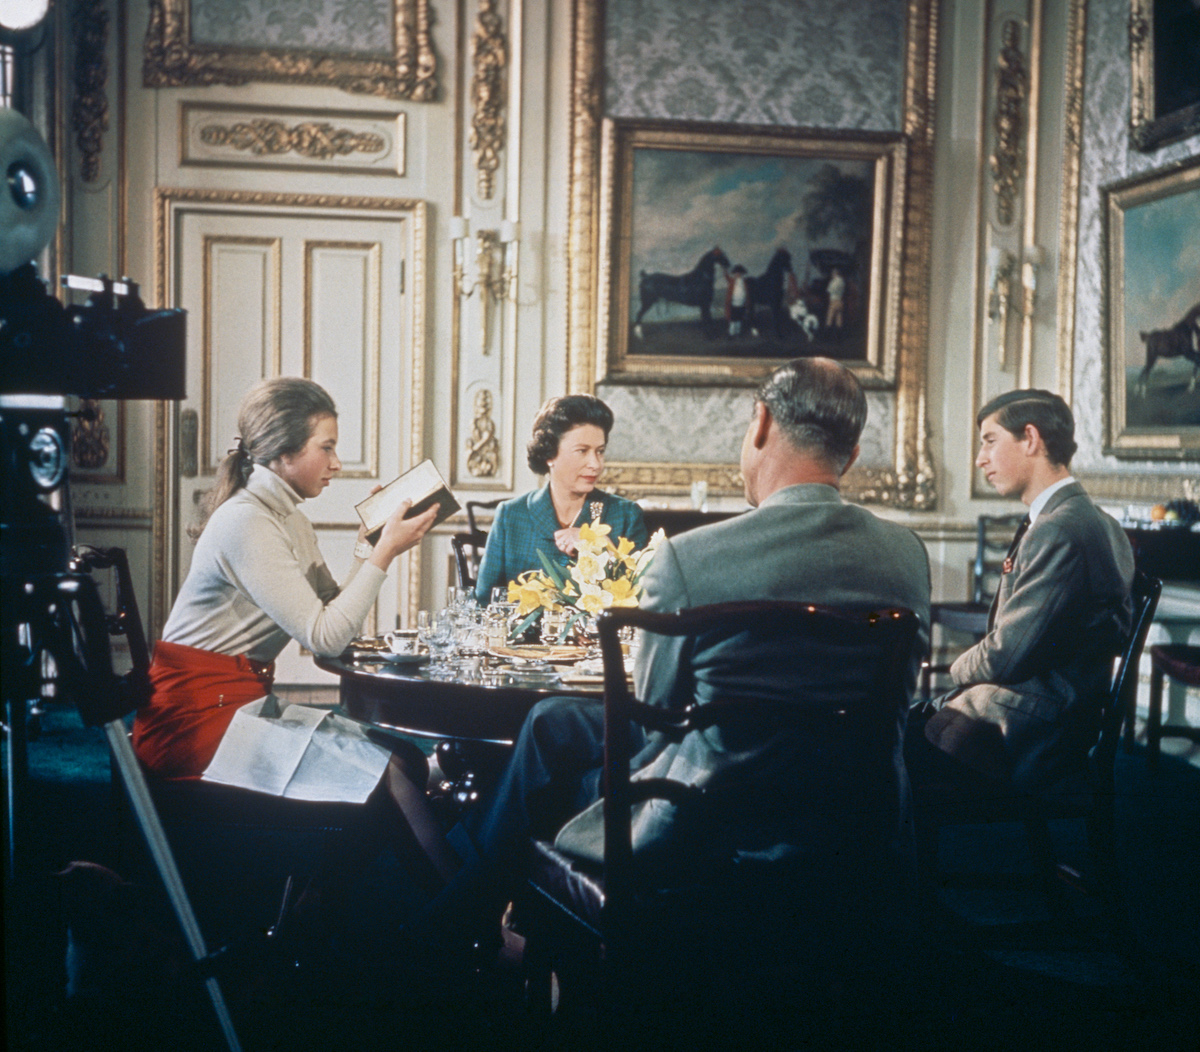 Queen Elizabeth II lunches with Prince Philip and their children Princess Anne and Prince Charles at Windsor Castle in Berkshire, circa 1969. A camera (left) is set up to film for Richard Cawston's BBC documentary 'Royal Family', which followed the Royal Family over a period of a year and was broadcast on 21st June 1969. 